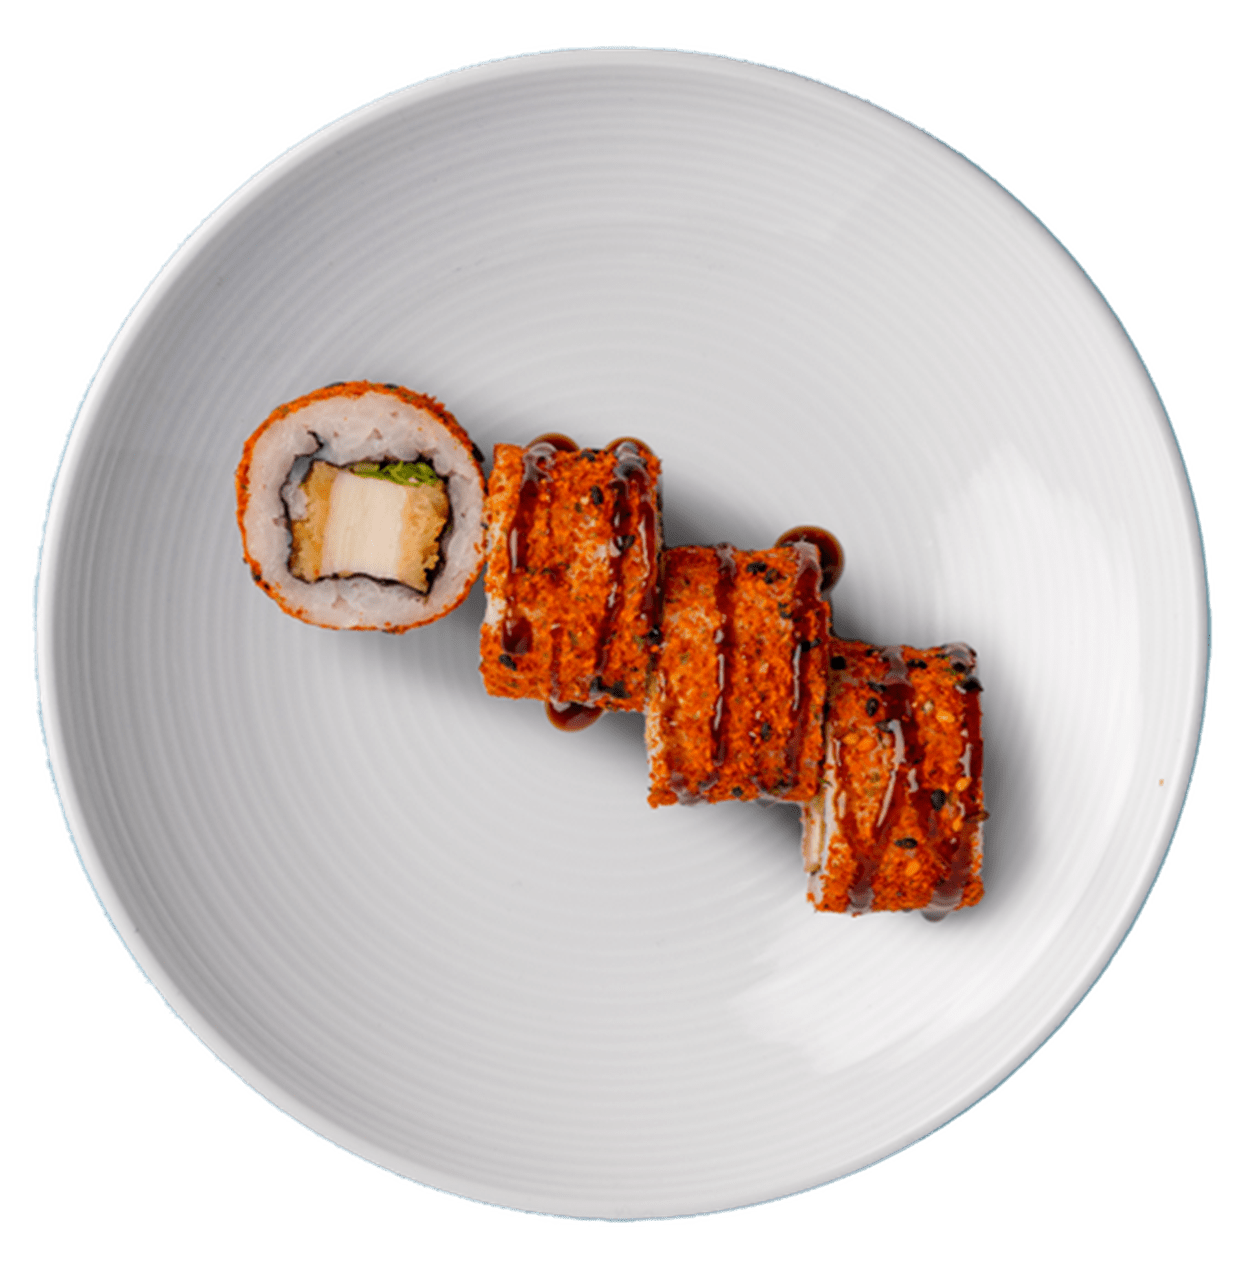 Spicy Chicken Sushi Roll - Cooking with a Wallflower